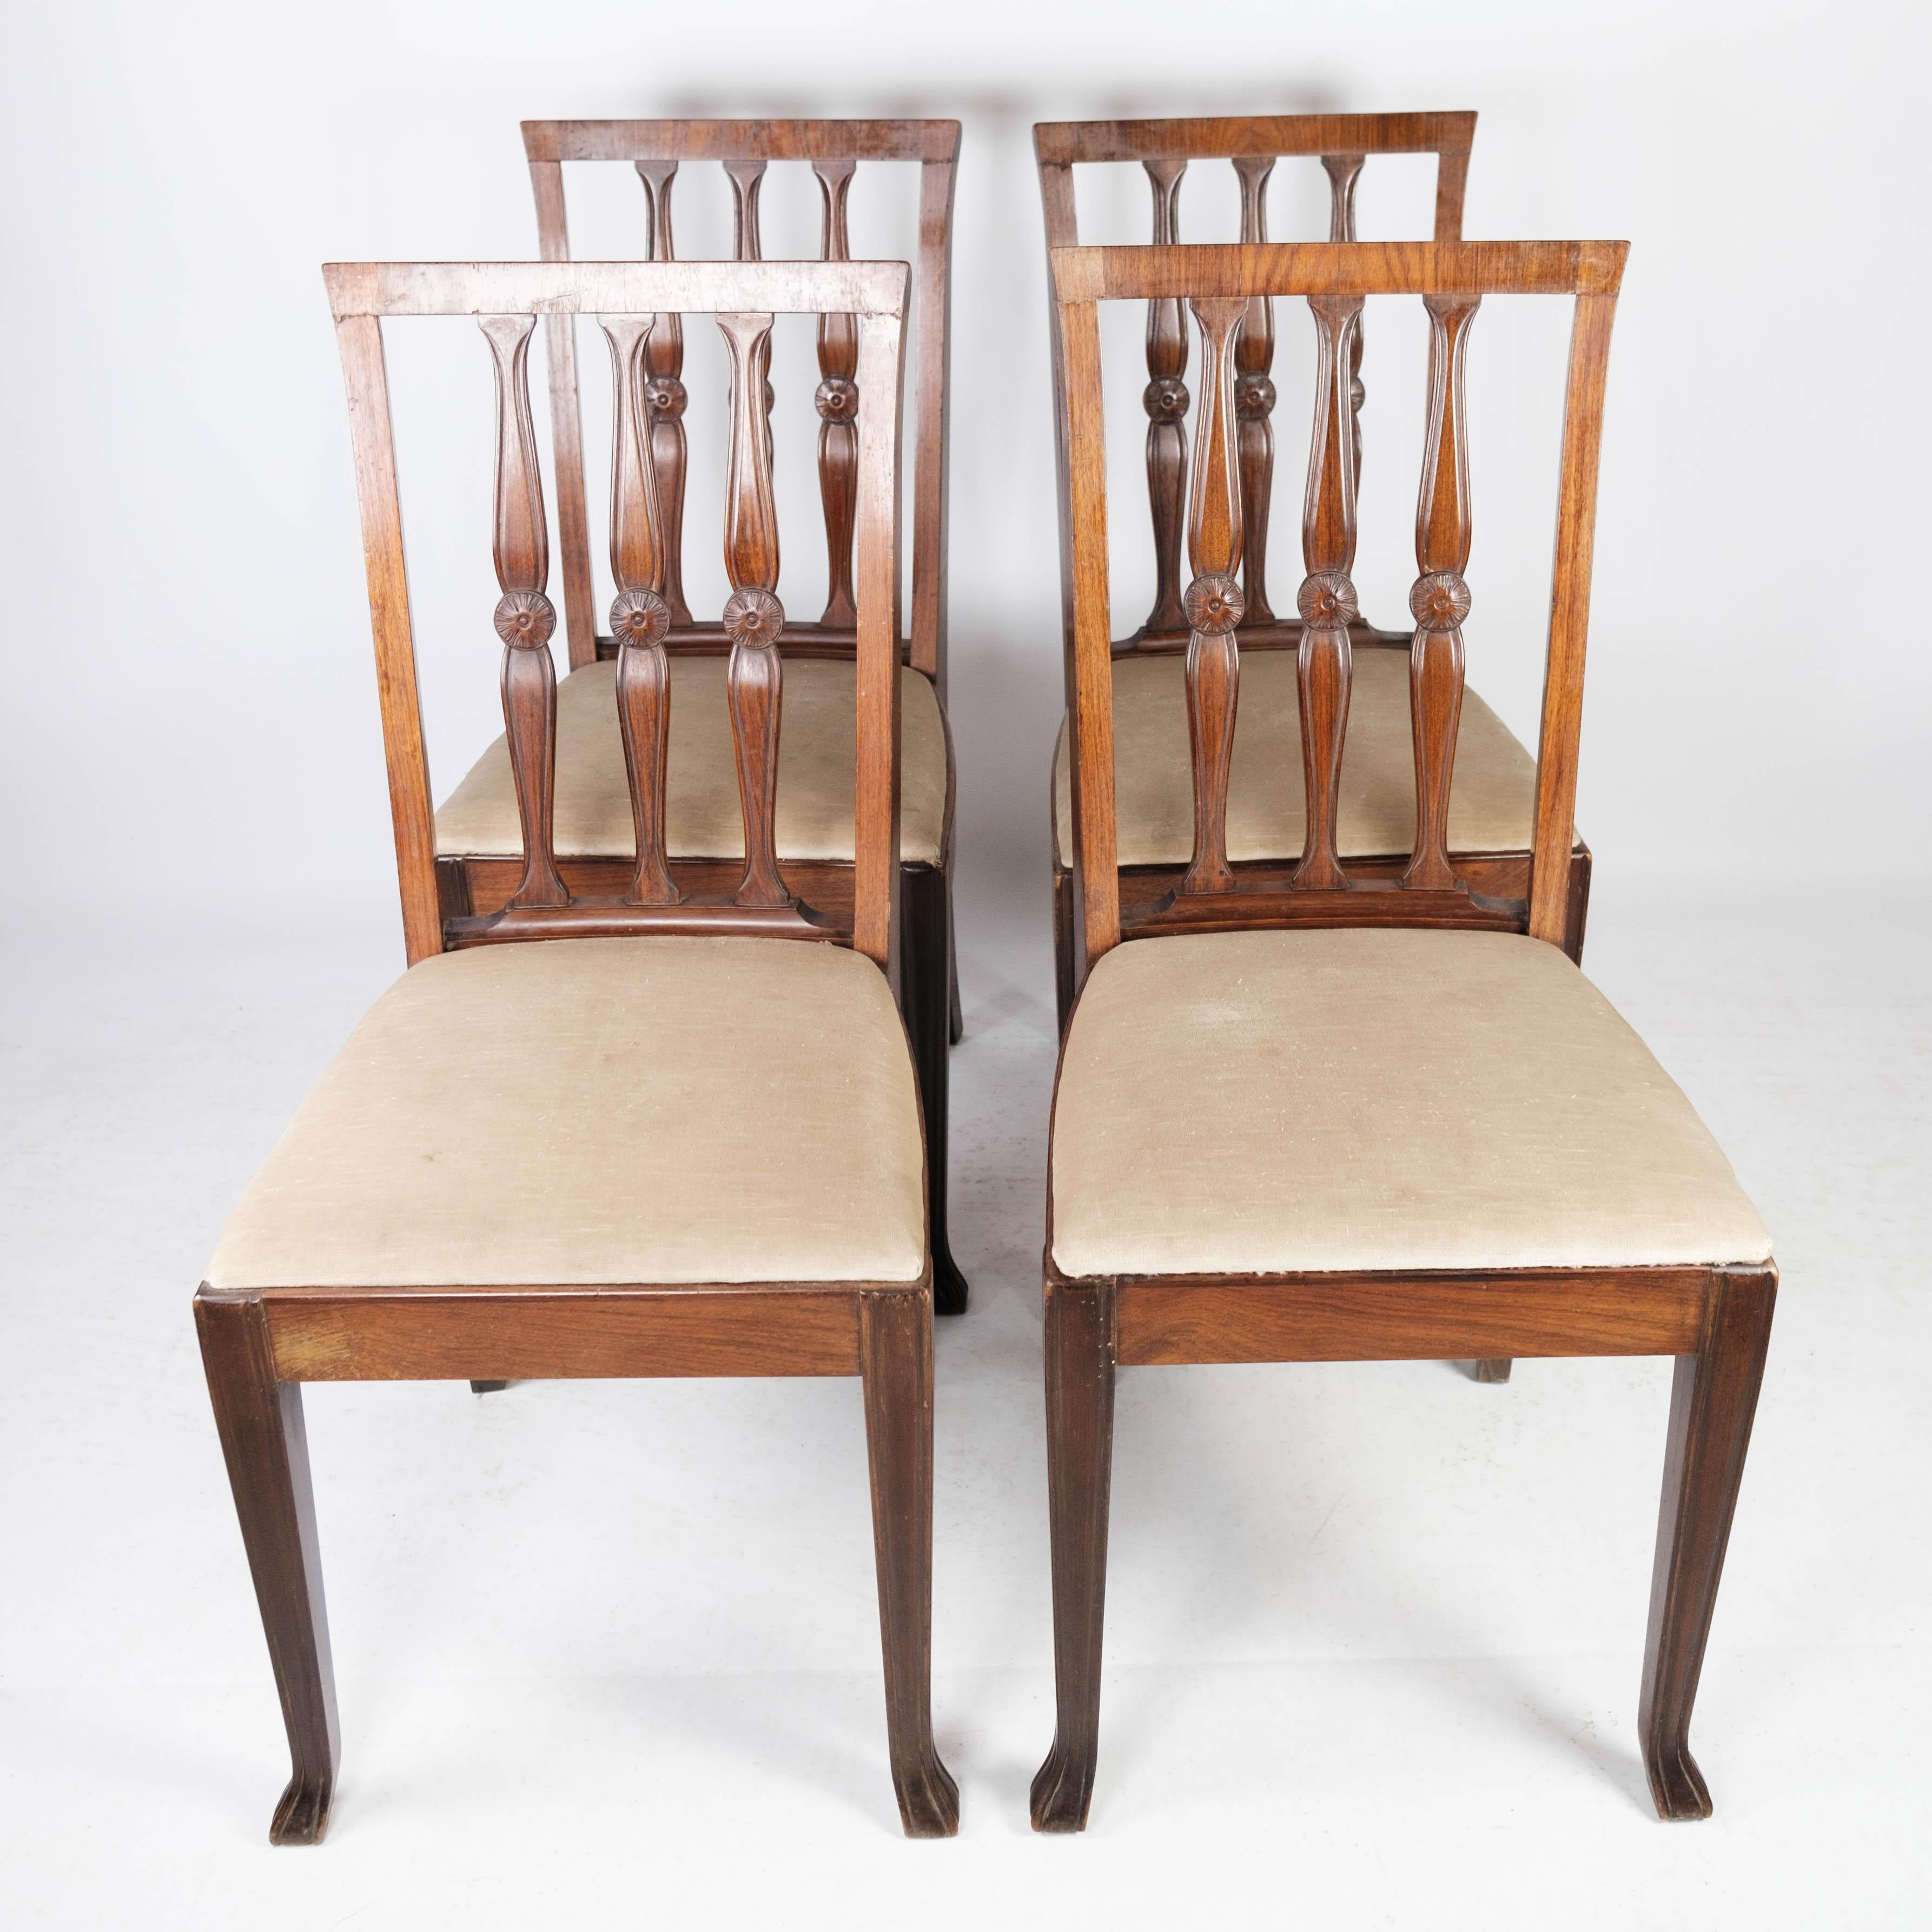 Set of four dining room chairs in rosewood and upholstered with light fabric, in great antique condition from the 1920s.
   